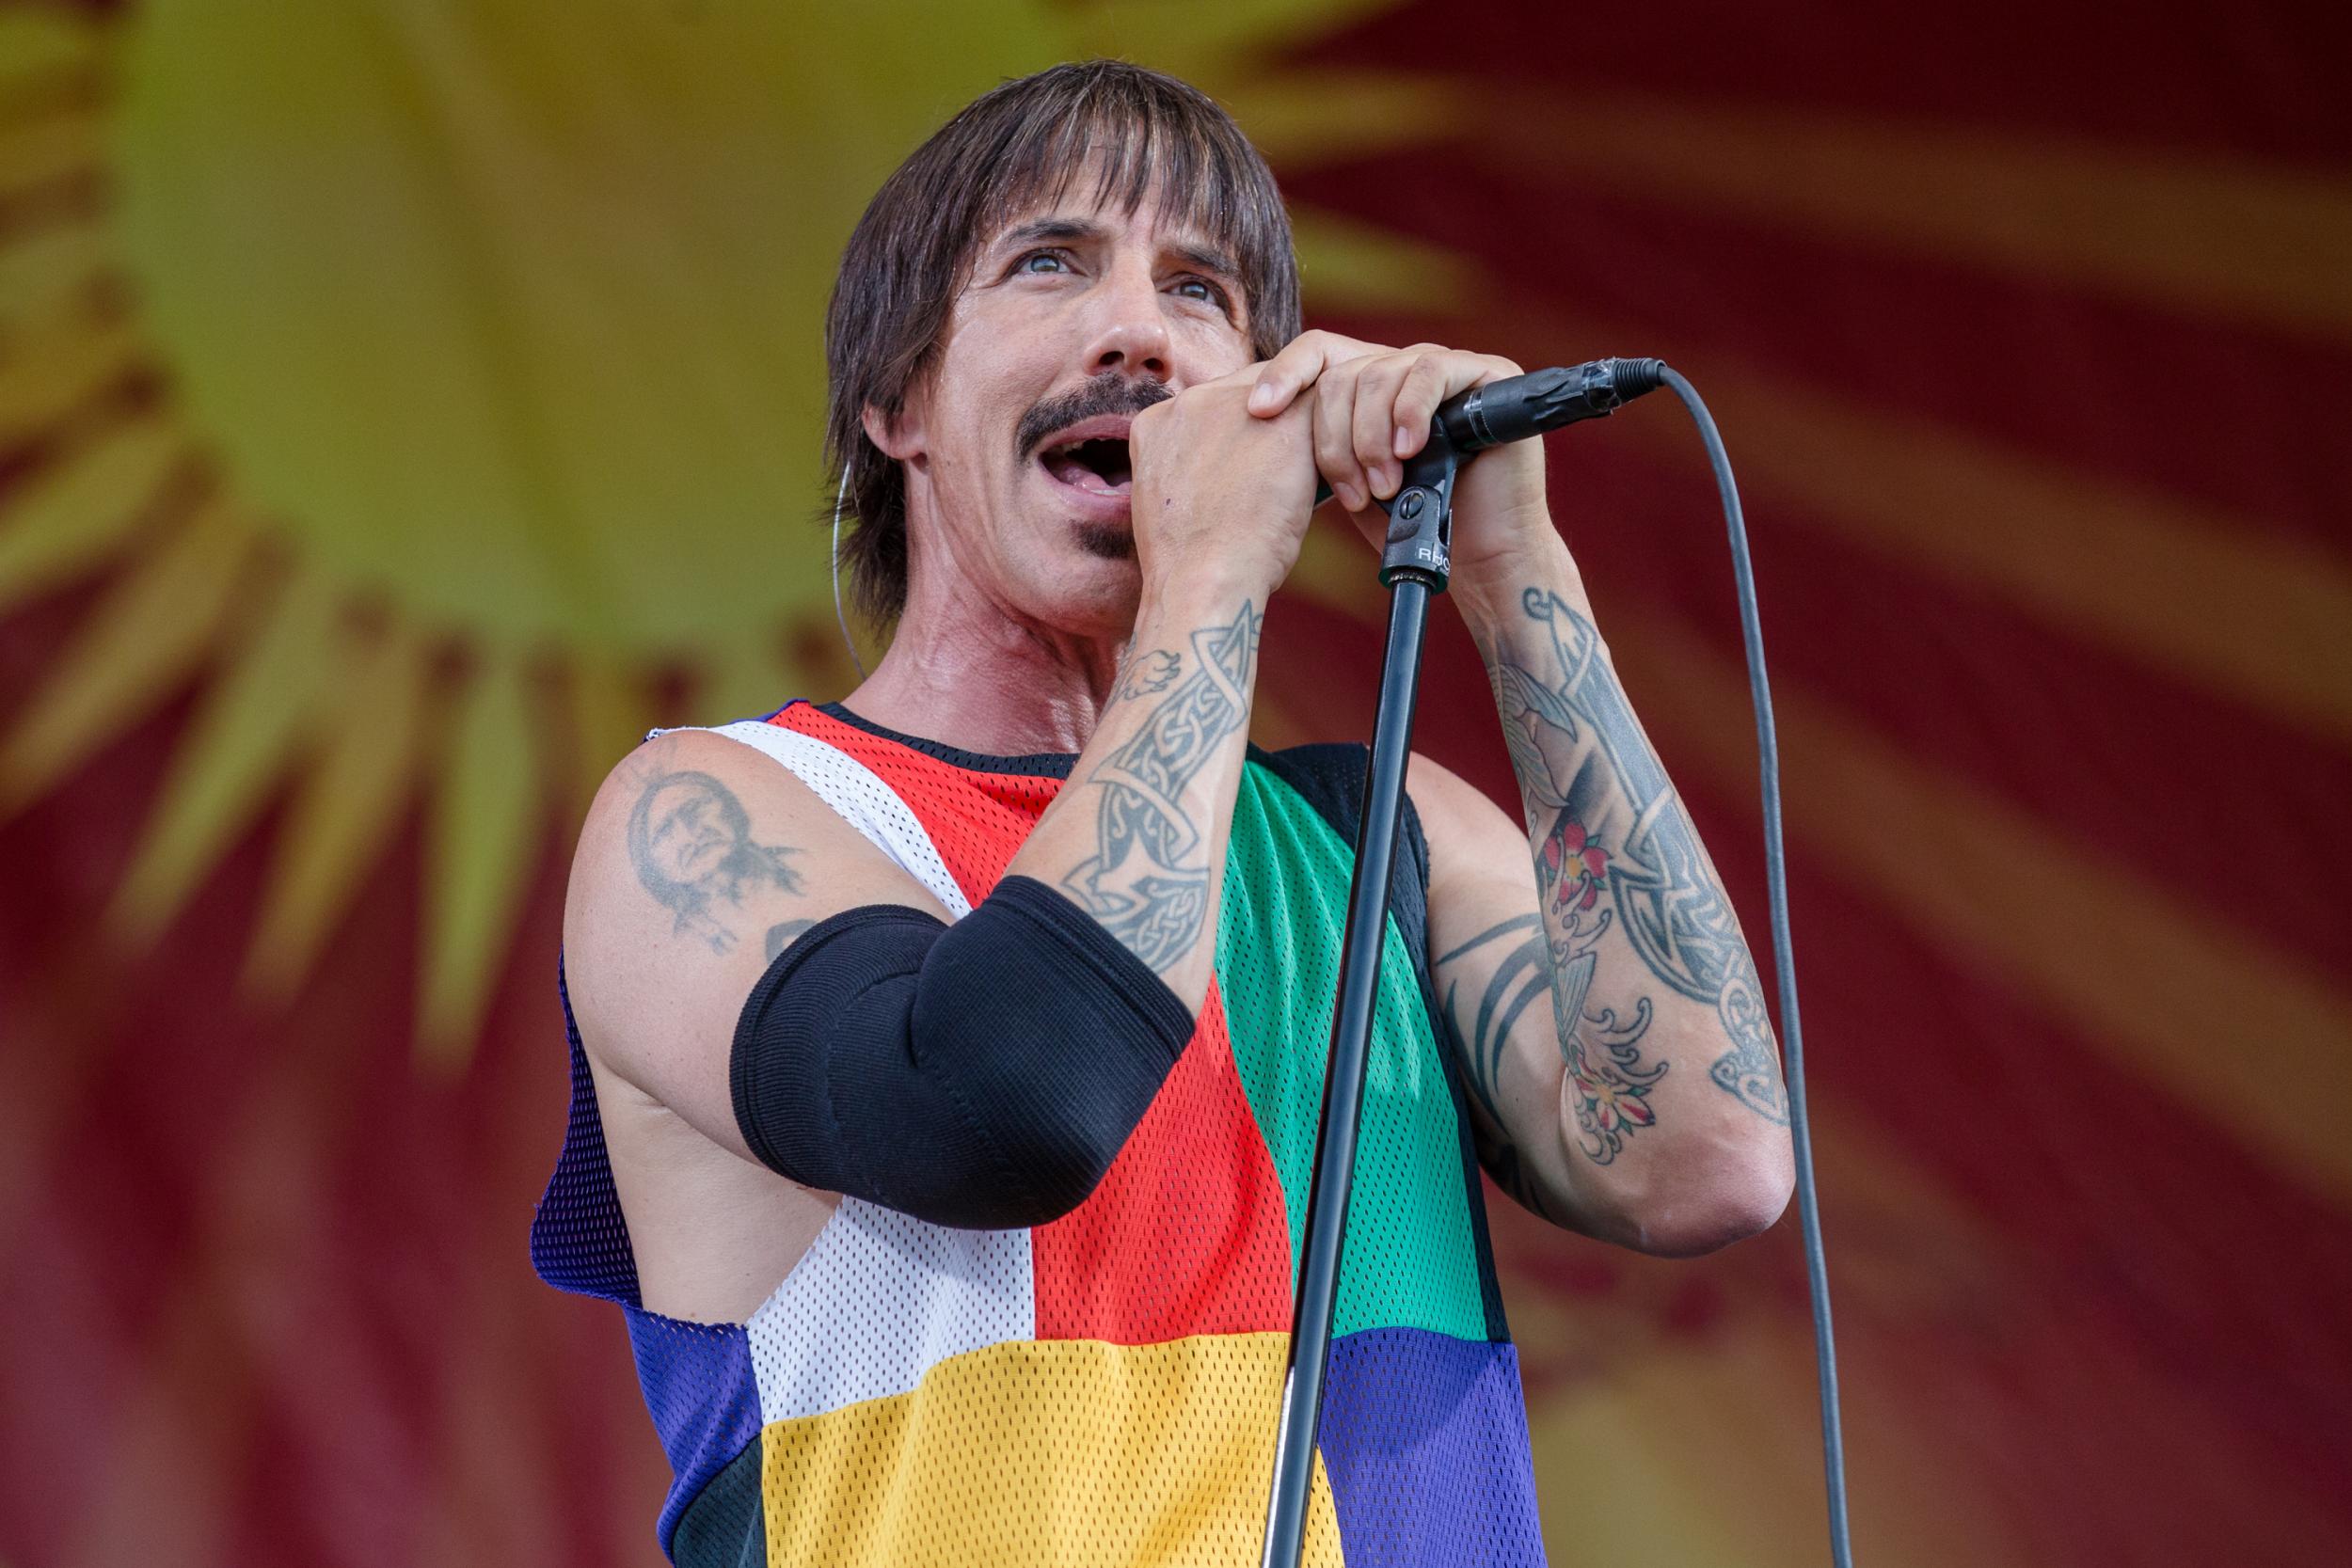 Messages of condolence for Kiedis have poured in on social media